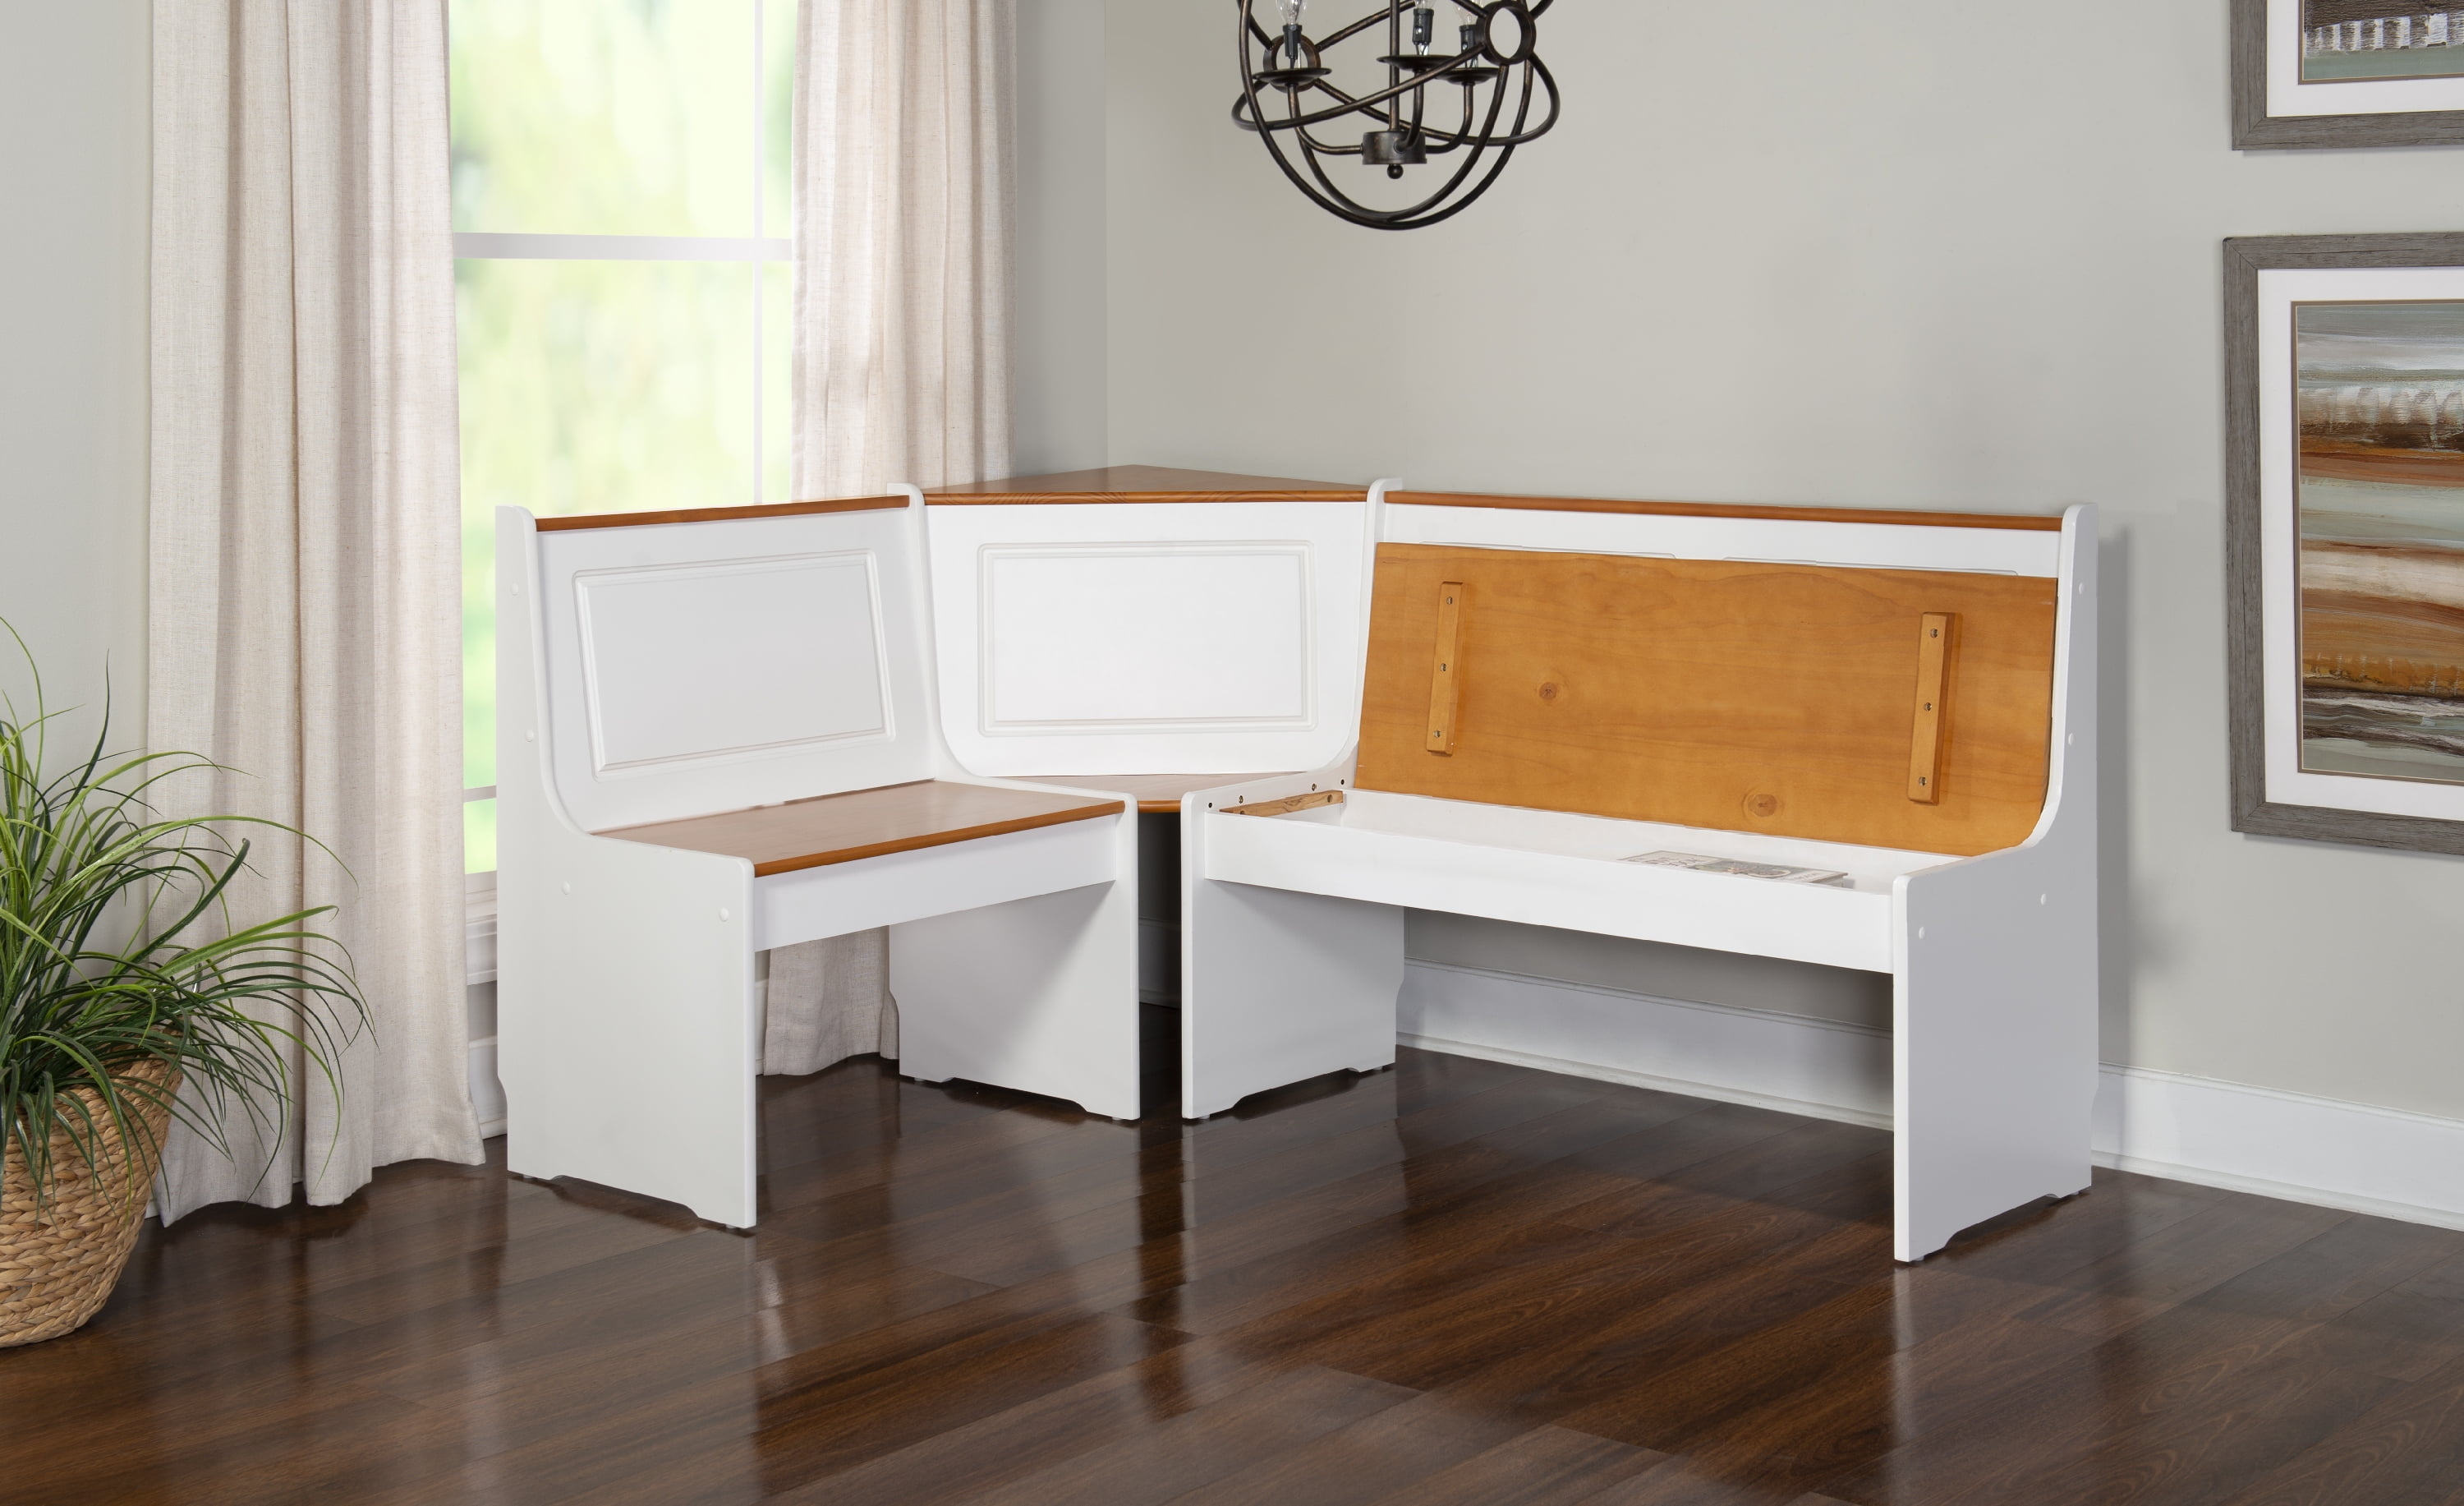 Linon Ardmore Wood Corner Dining Breakfast Nook with Table and Storage,  Seats 5-6, White and Natural Finish 